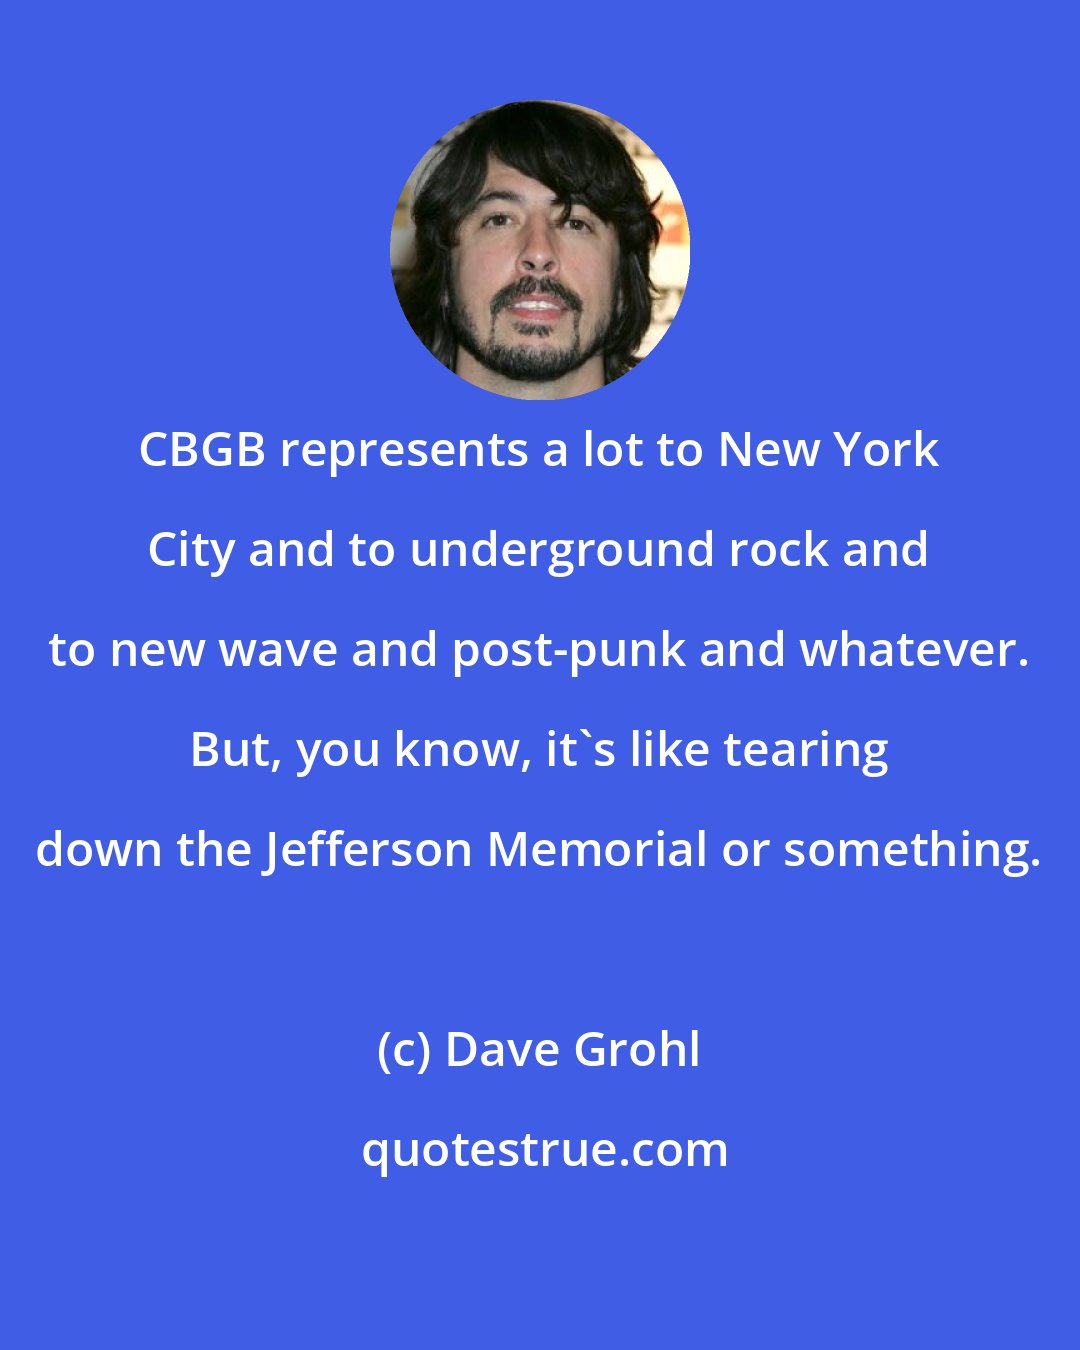 Dave Grohl: CBGB represents a lot to New York City and to underground rock and to new wave and post-punk and whatever. But, you know, it's like tearing down the Jefferson Memorial or something.